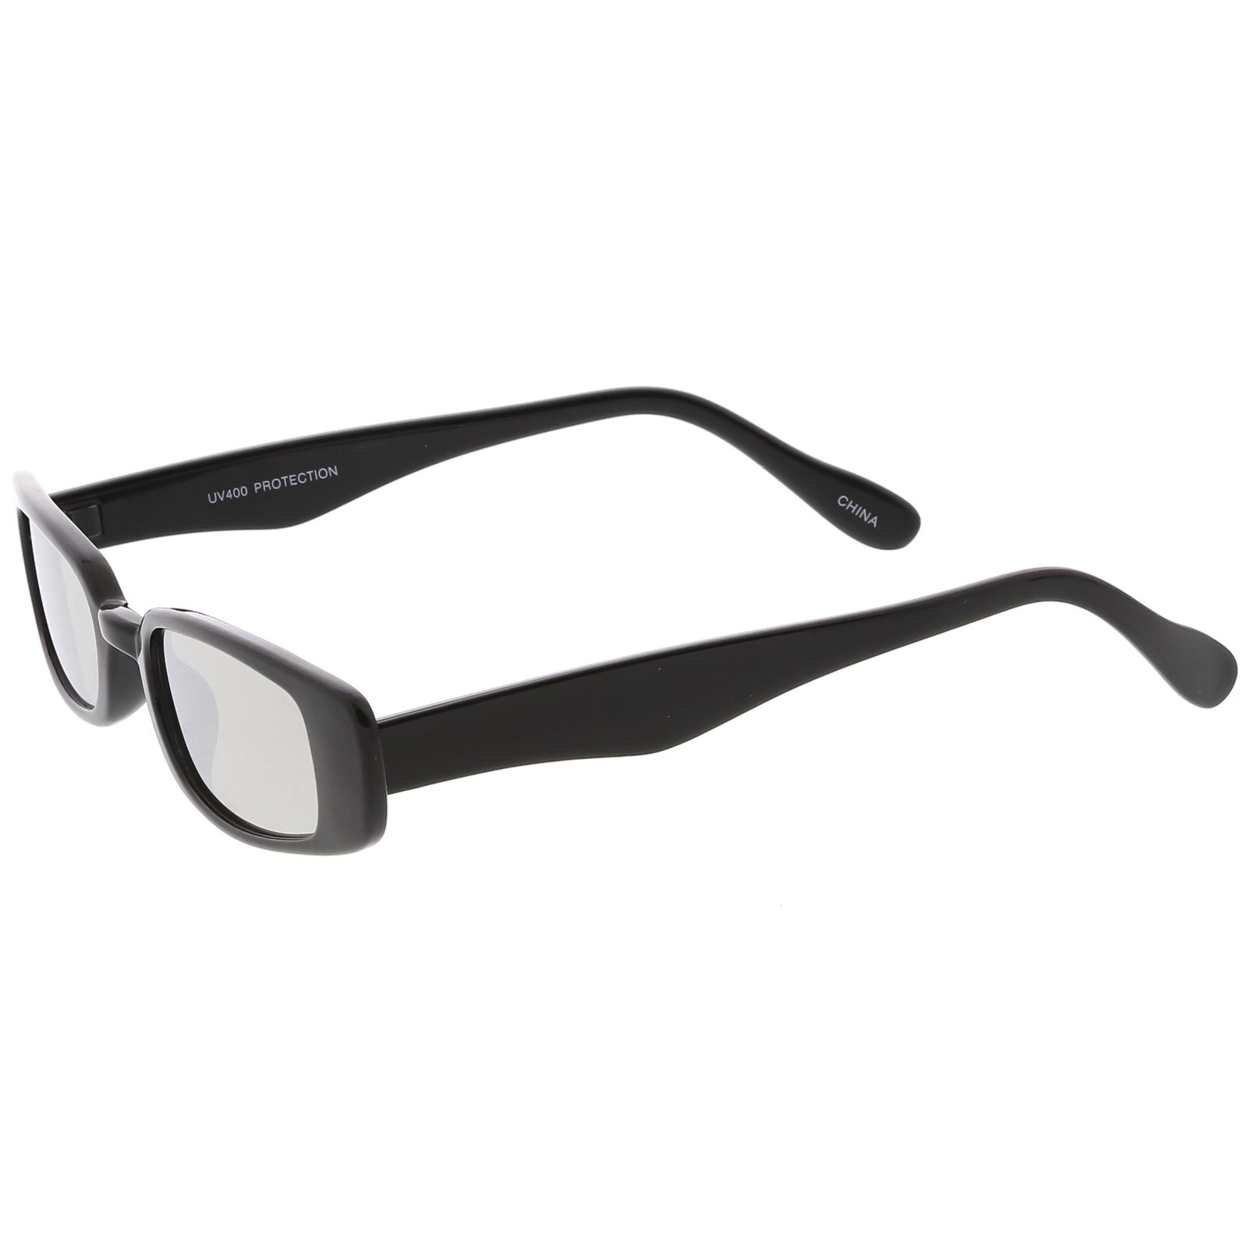 Extreme Thin Small Rectangle Sunglasses Mirrored Lens 49mm - Black / Yellow Mirror